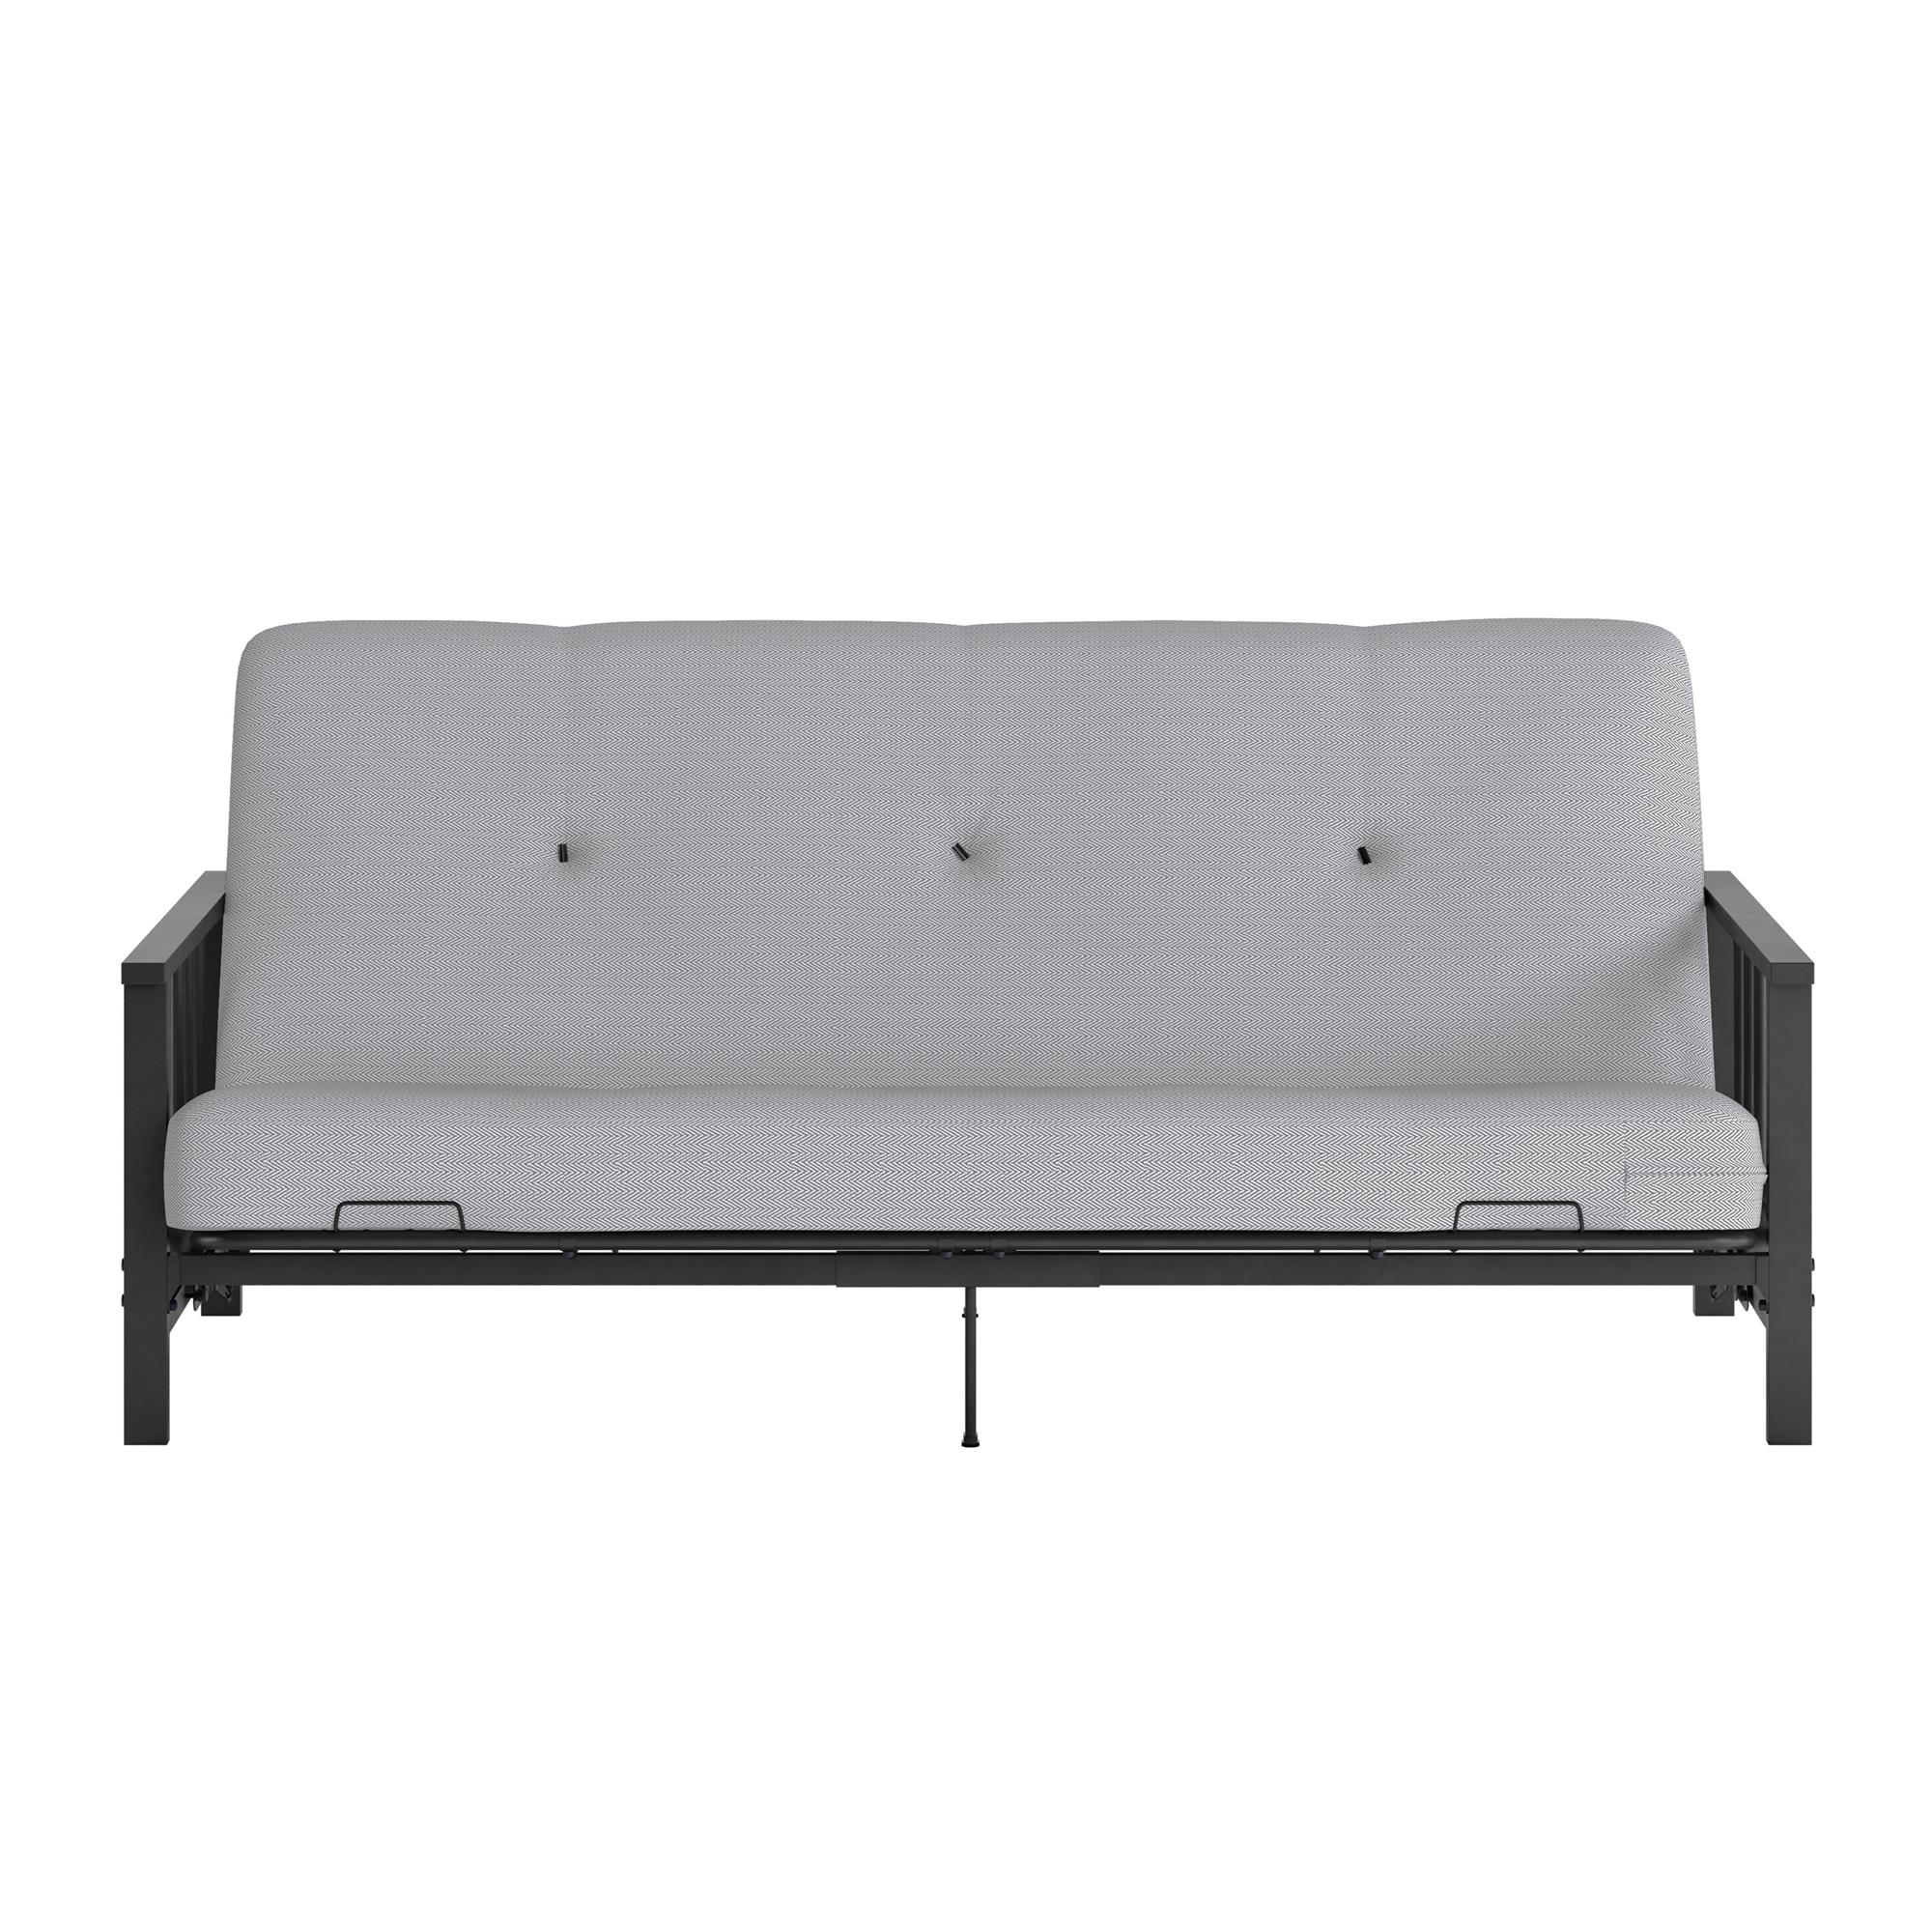 DHP Harlow Full Metal Arm Futon with 6-Inch Thermobonded High Density Polyester Fill Herringbone Mattress - image 5 of 19